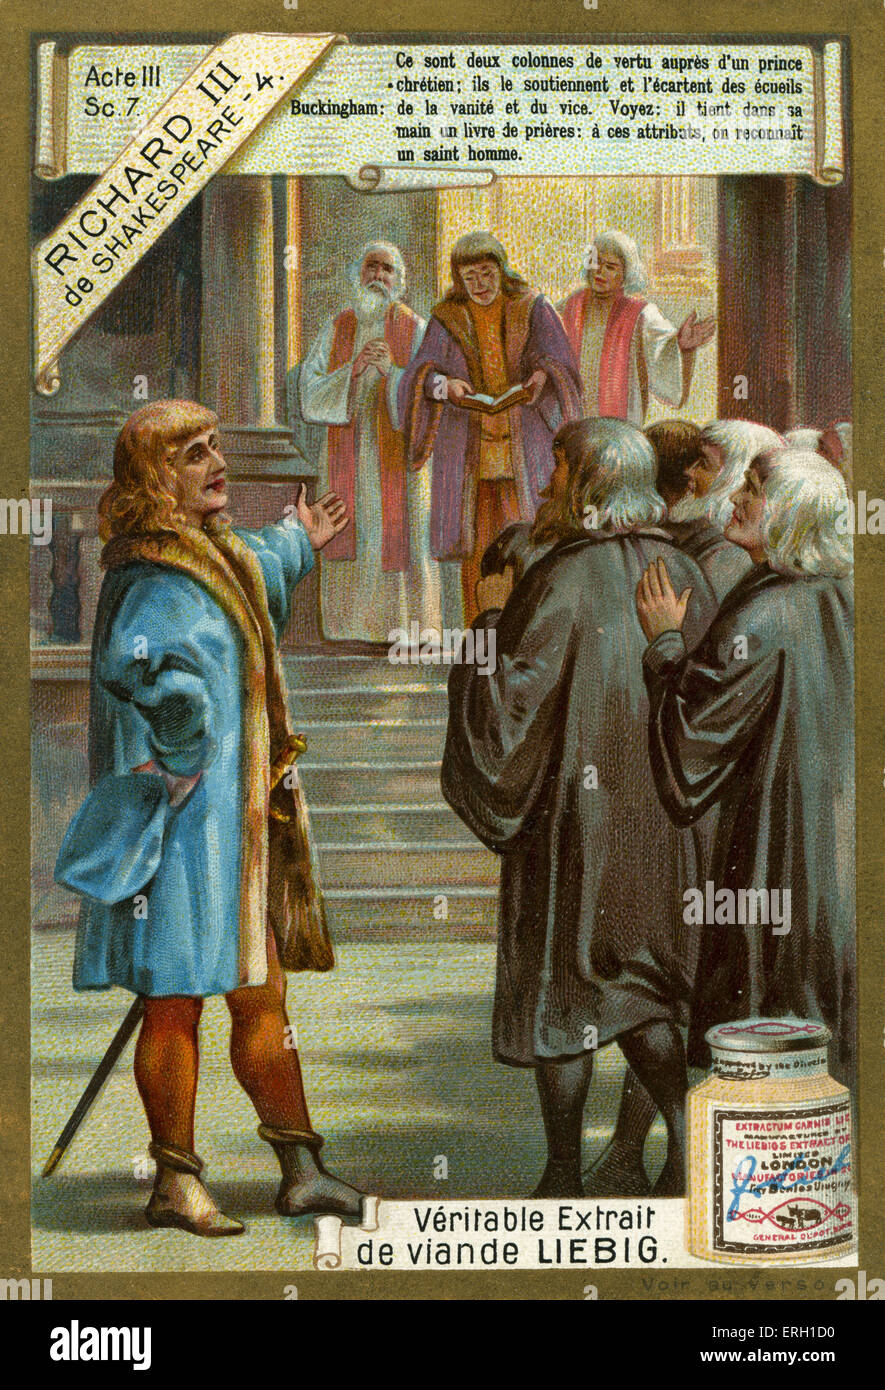 Richard III by William Shakespeare.  Act III, scene 7.  Richard and Buckingham’s plot for Richard to be begged to be king: Stock Photo